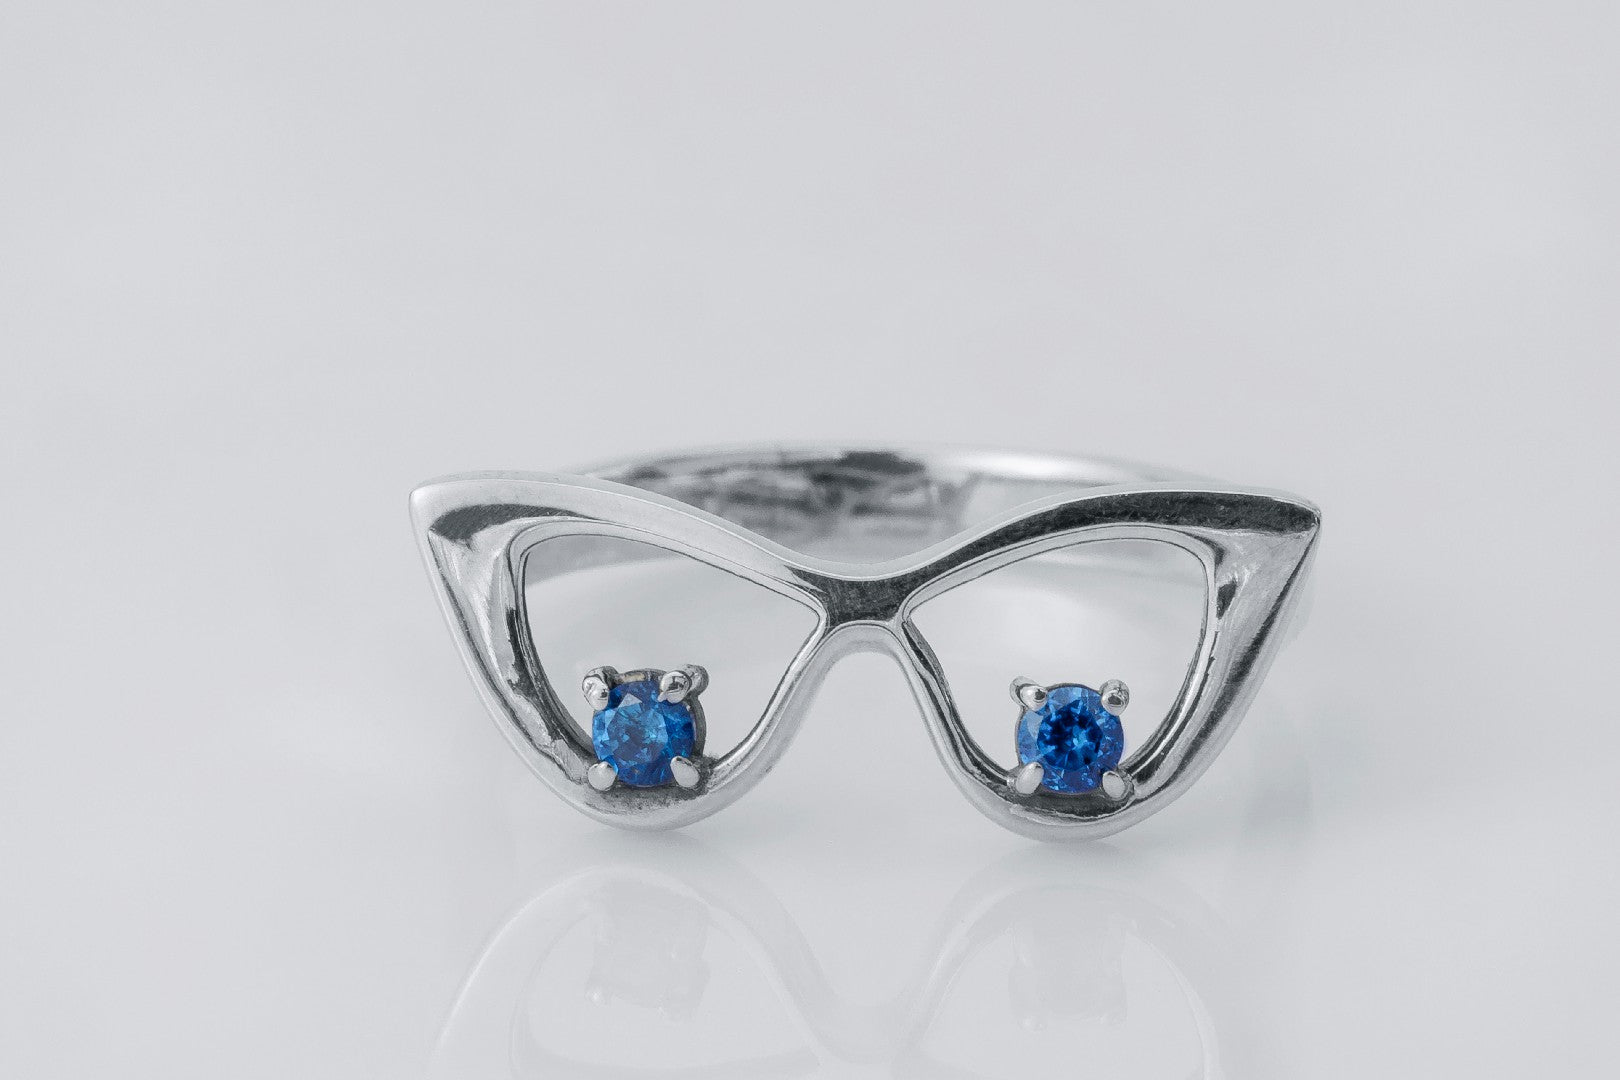 Stylish Glasses Ring with Blue Gems